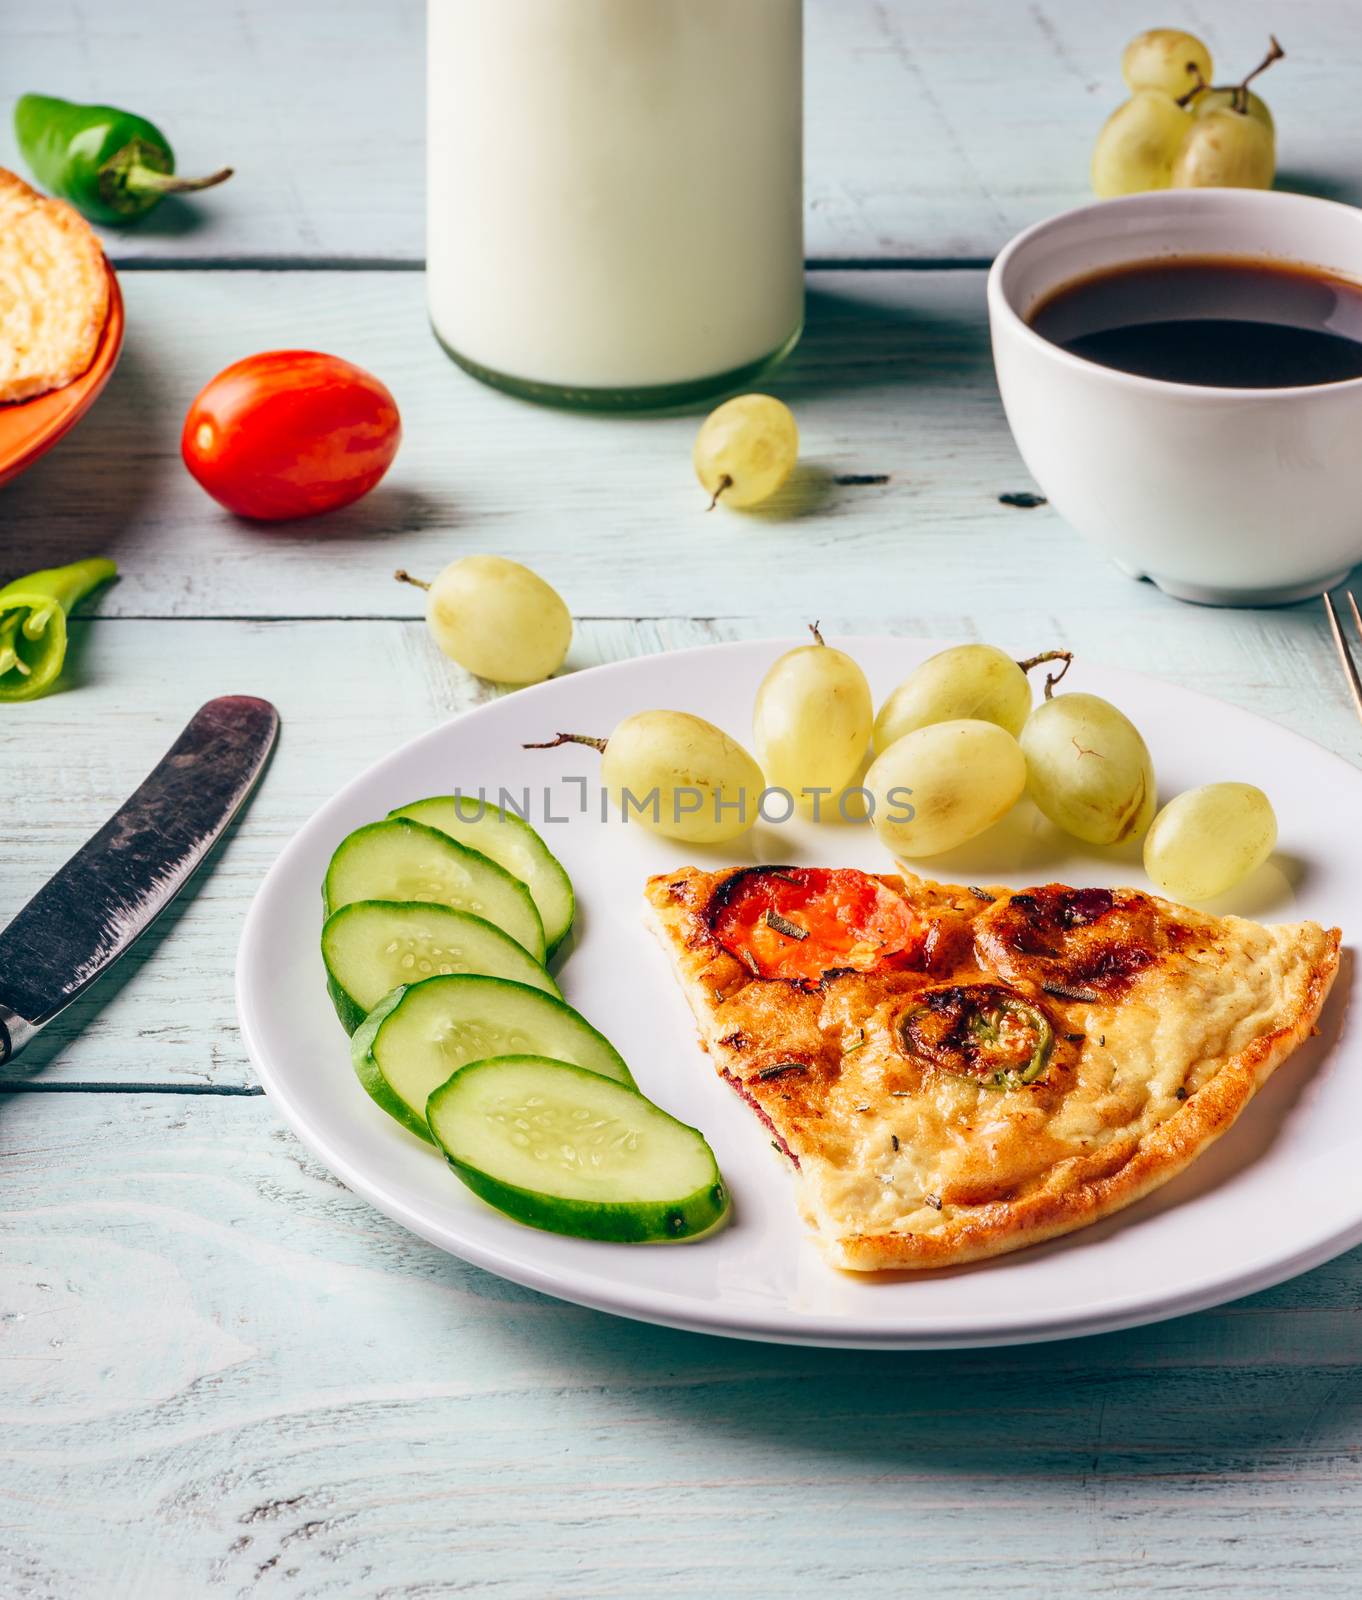 Healthy breakfast with frittata, fruits, vegetables, milk and cup of coffee on light wooden background.